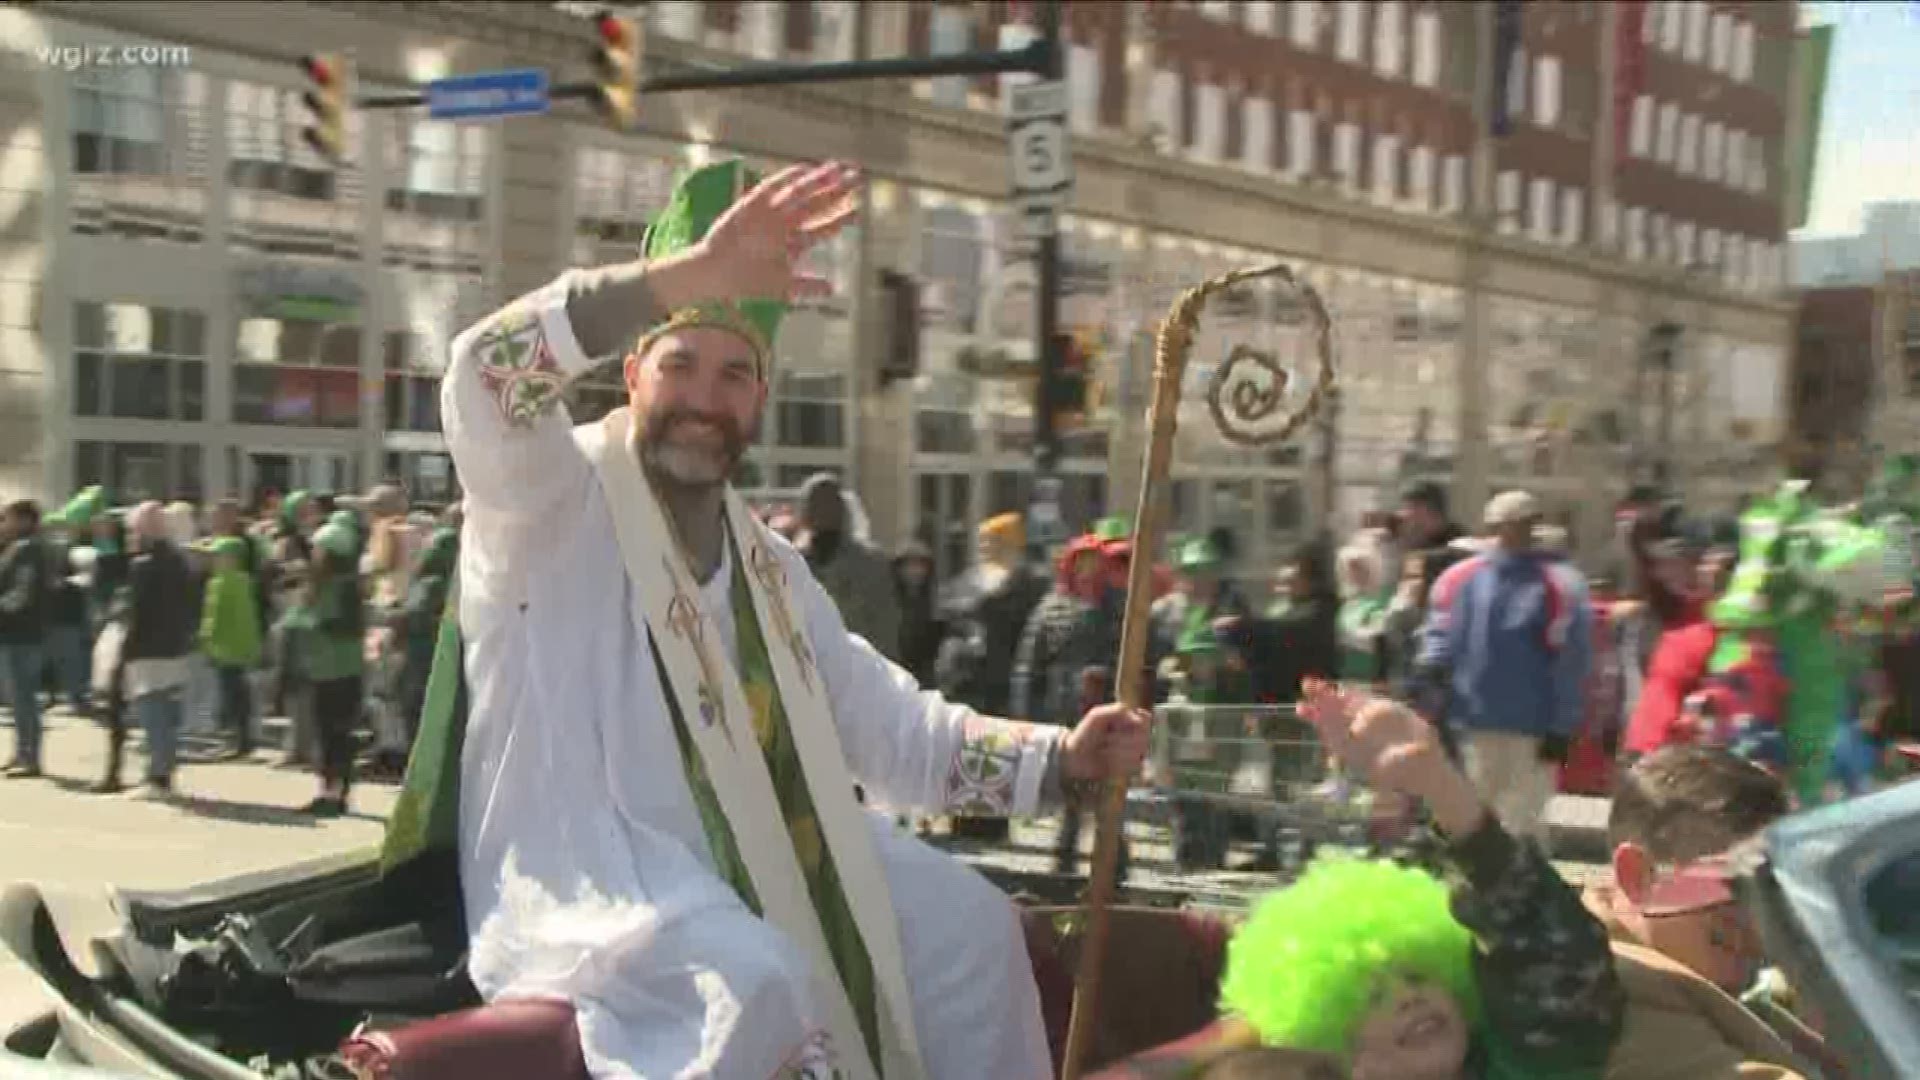 Patrick McGuinness from Hamburg was announced as grand marshal today. He says his parents were from Ireland and his family has been a part of the parade for years.